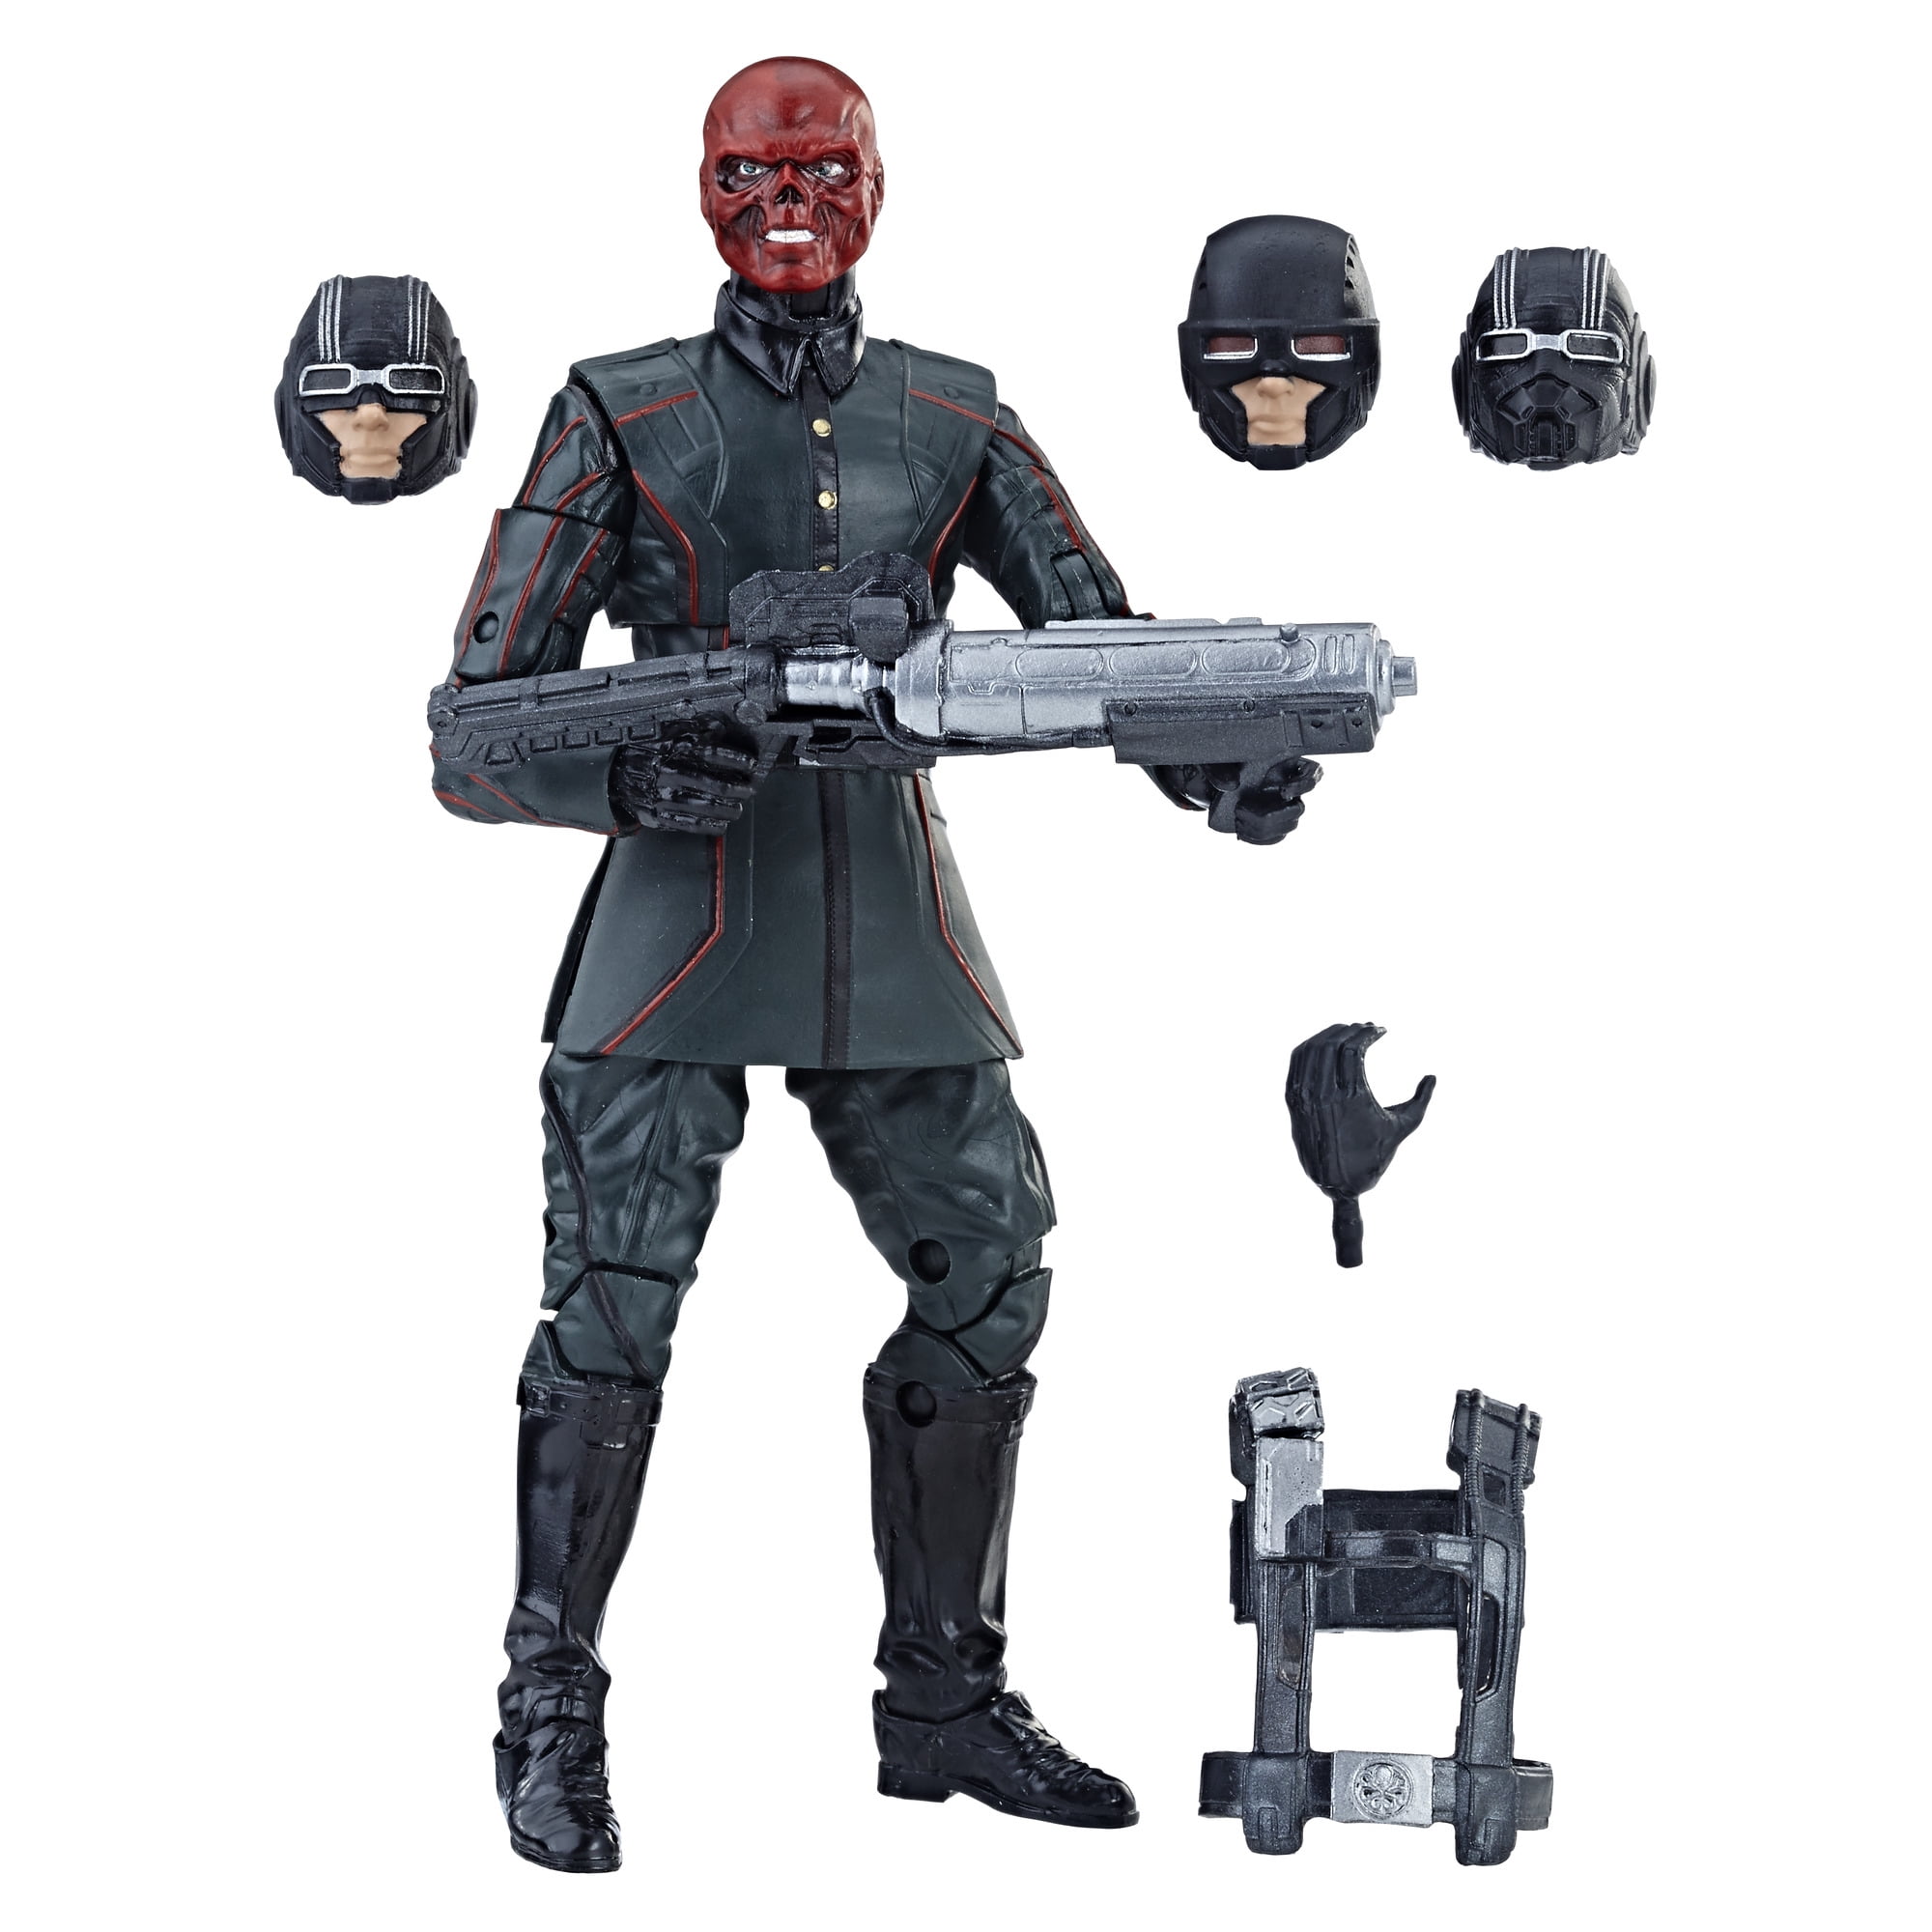 Hasbro 31688 Captain America Movie 4 in Series 1 Action Figure Red Skull for sale online